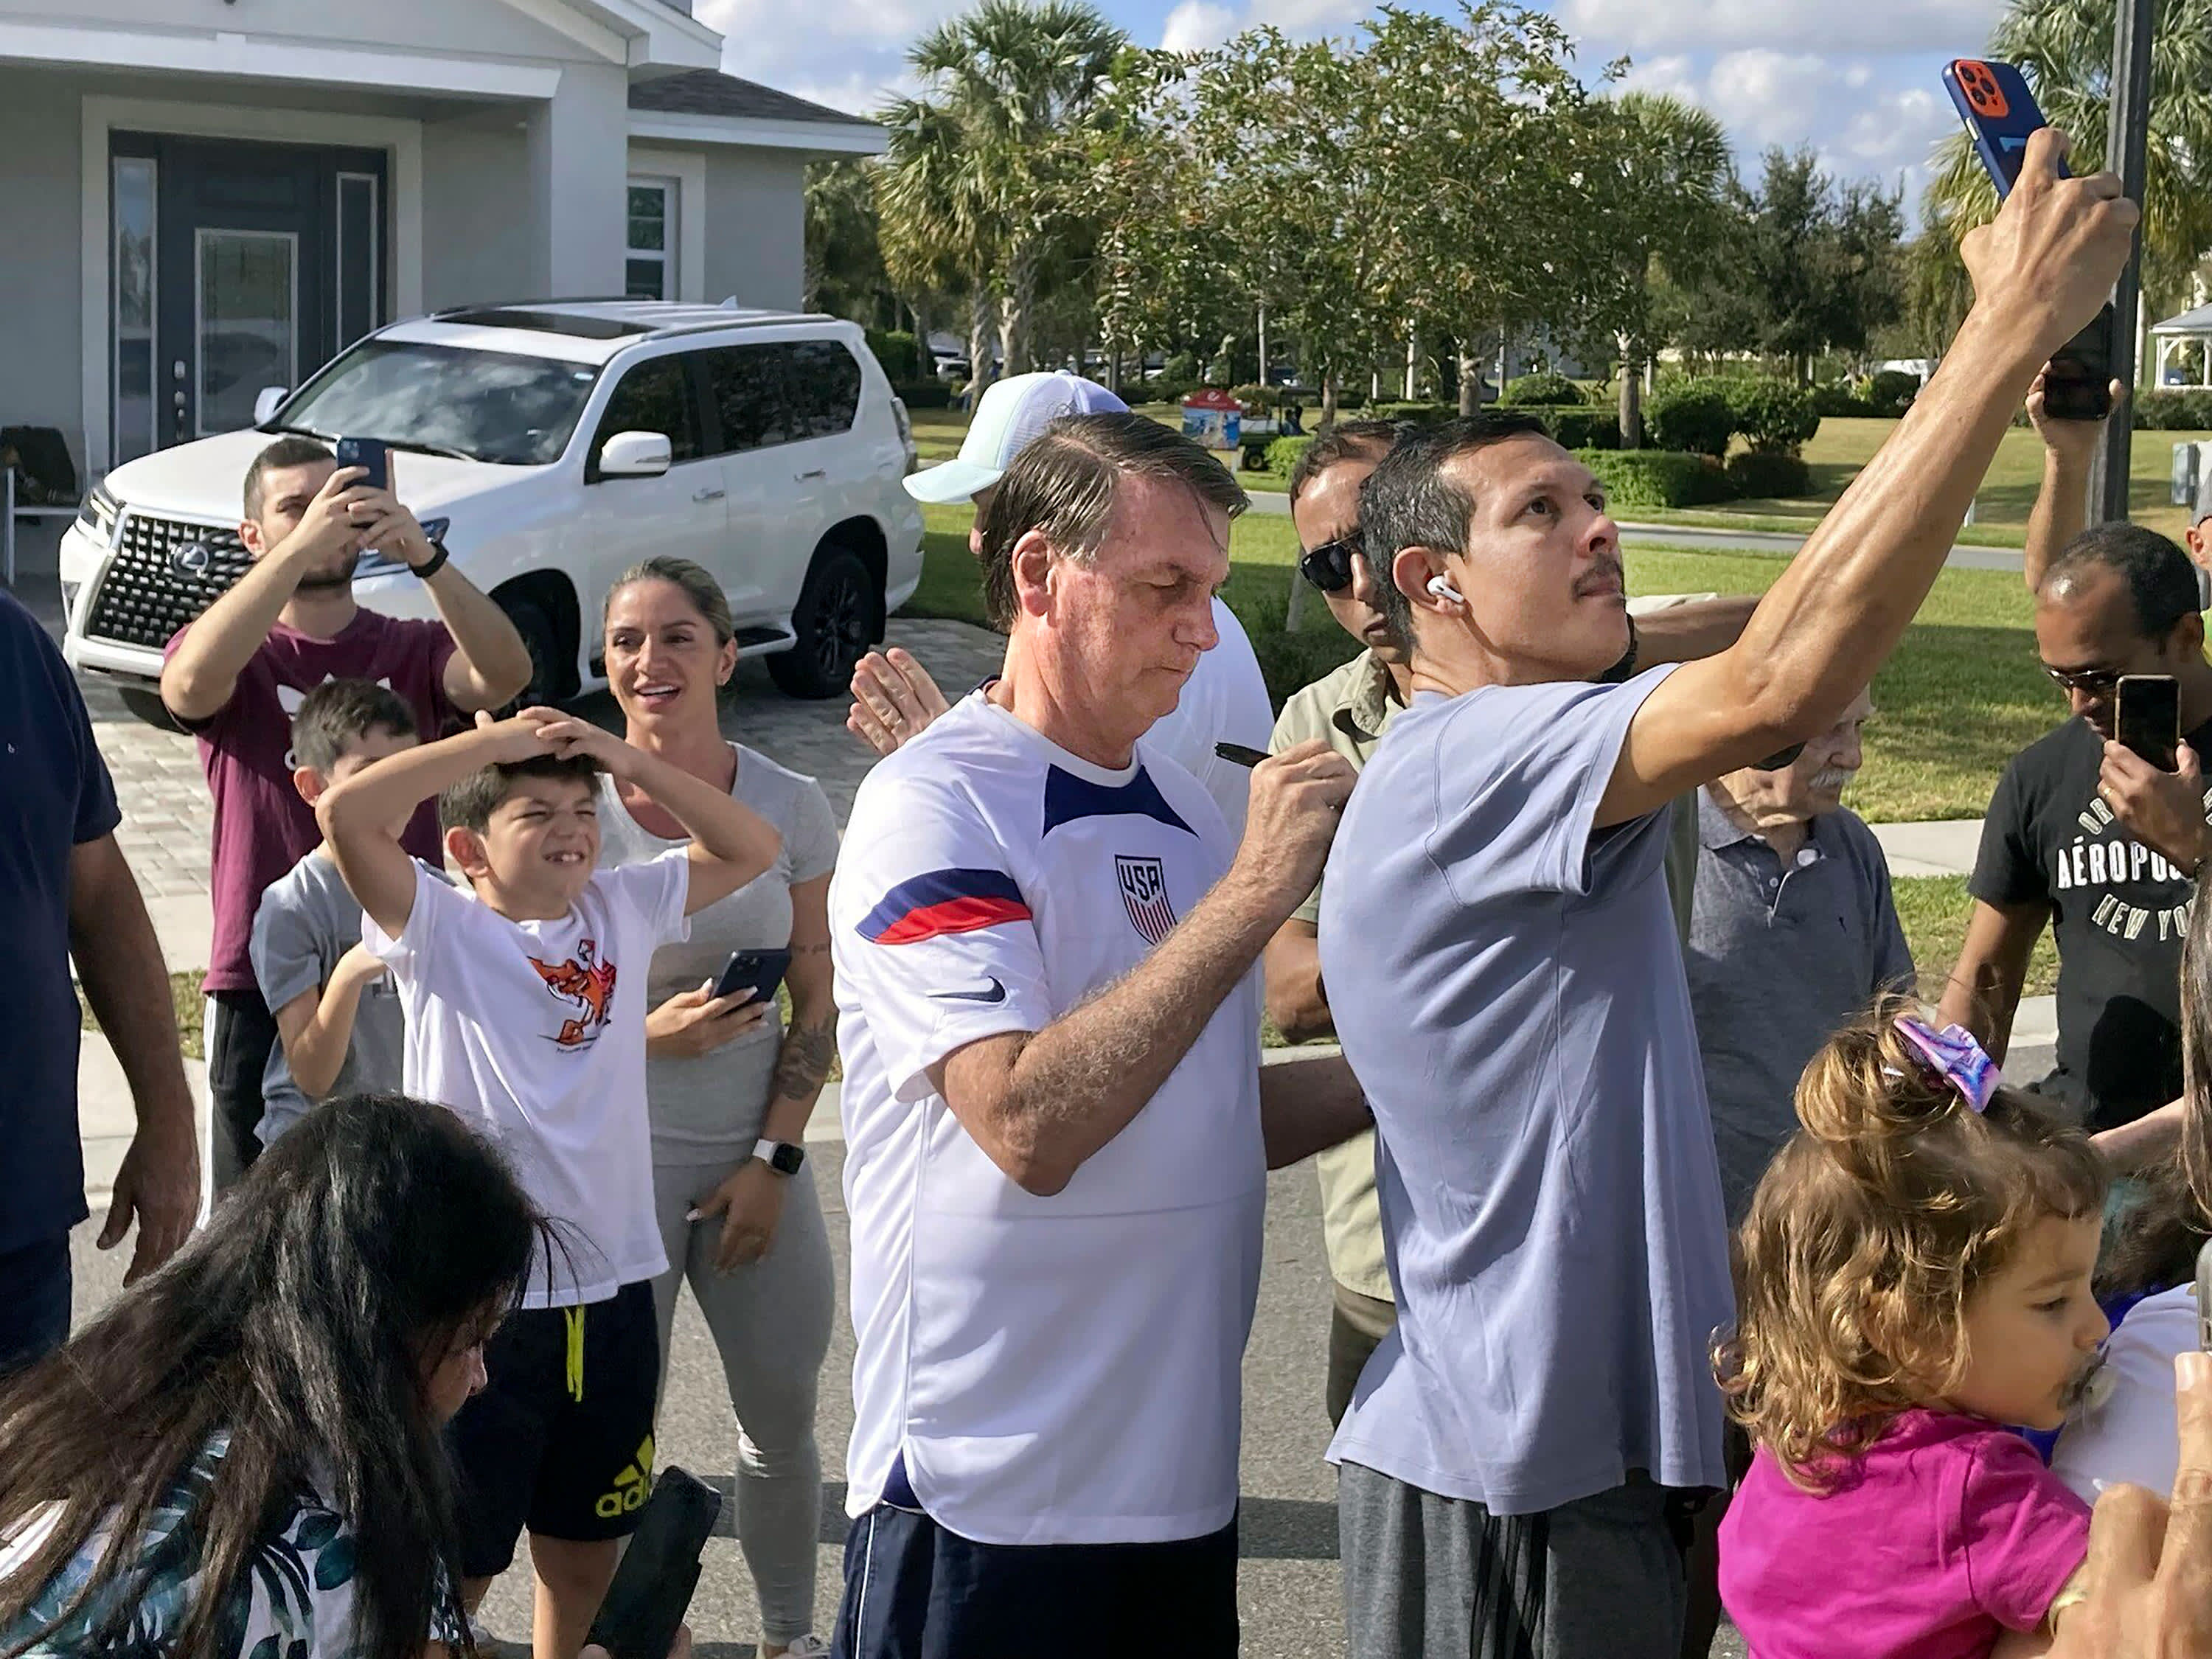 As Brazil reels from riots, Bolsonaro finds home near Florida